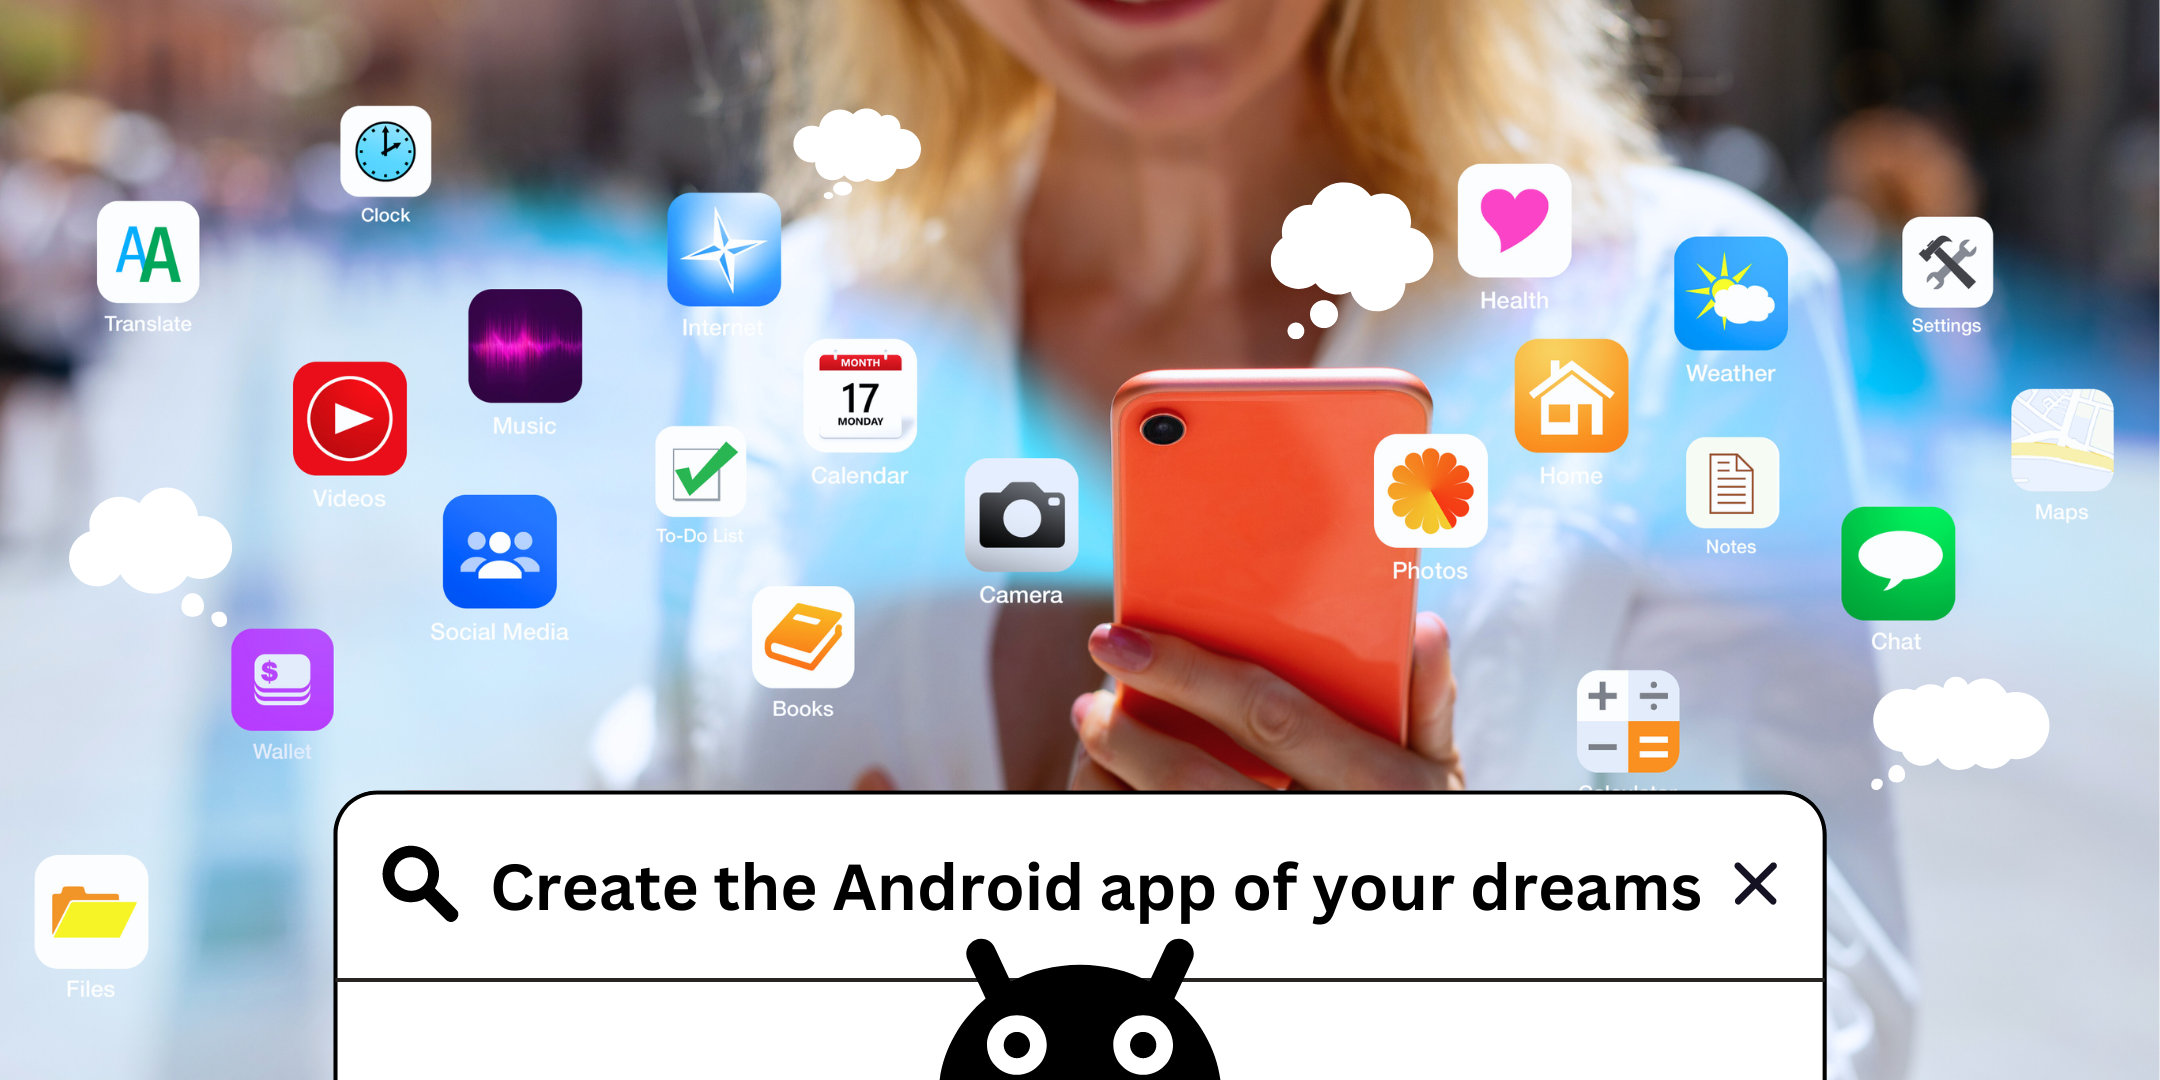 Create the Android app of your dreams